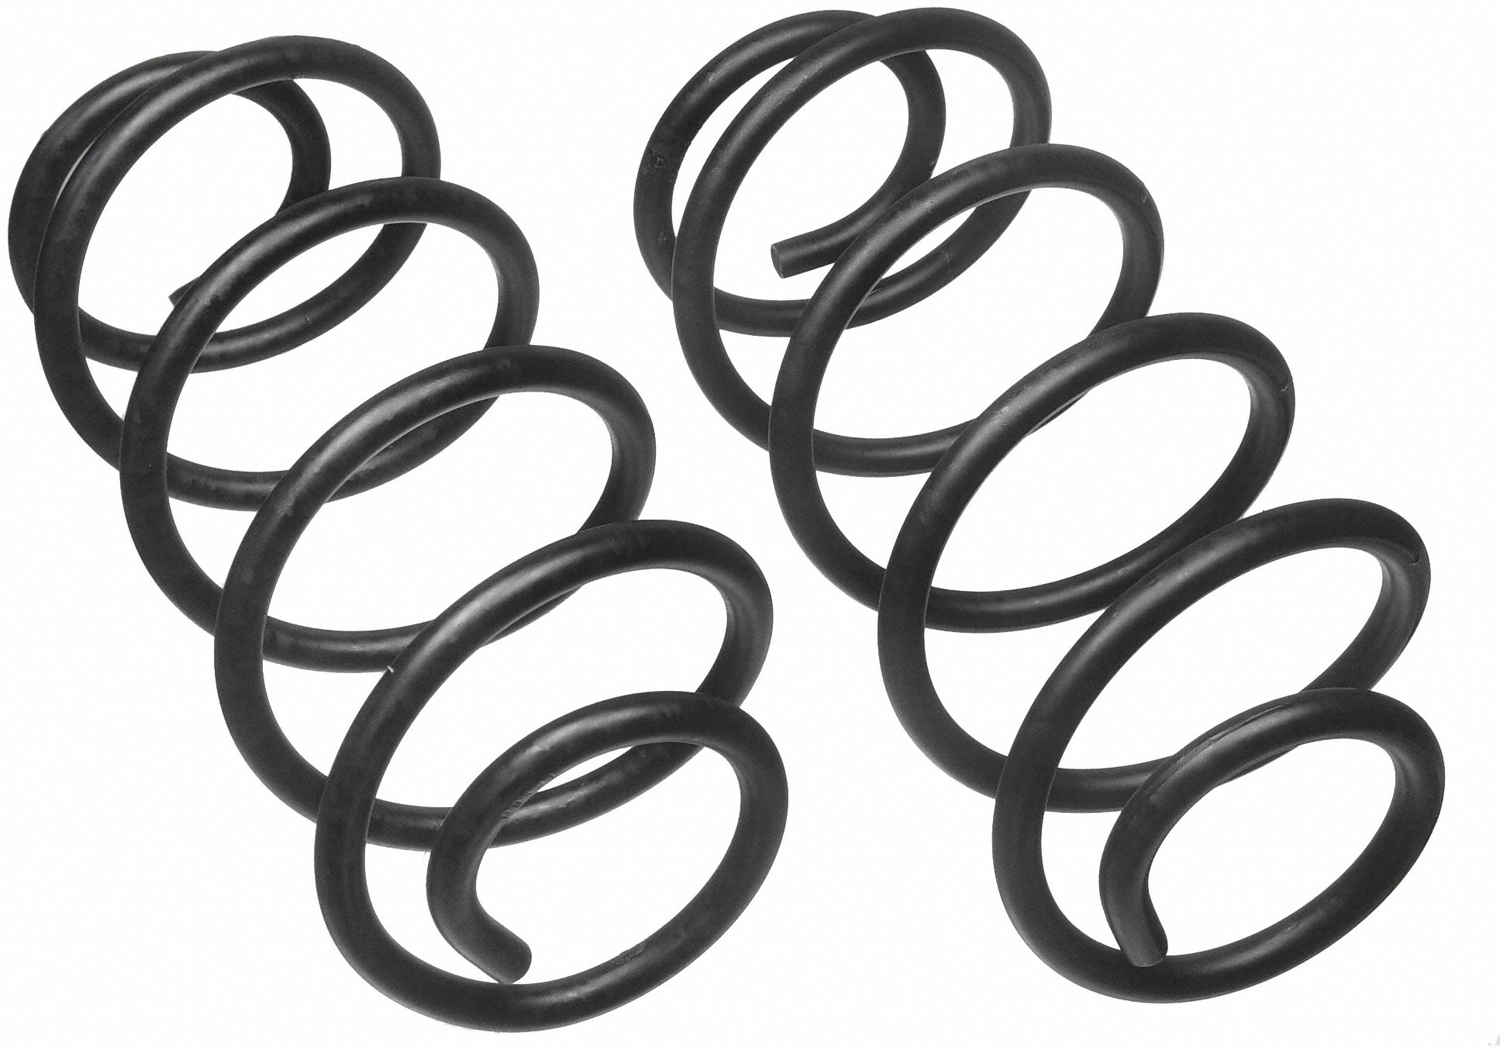 Image of ID 5557 Moog 5557 Coil Spring Set Fits 1990-1990 Chevrolet Caprice